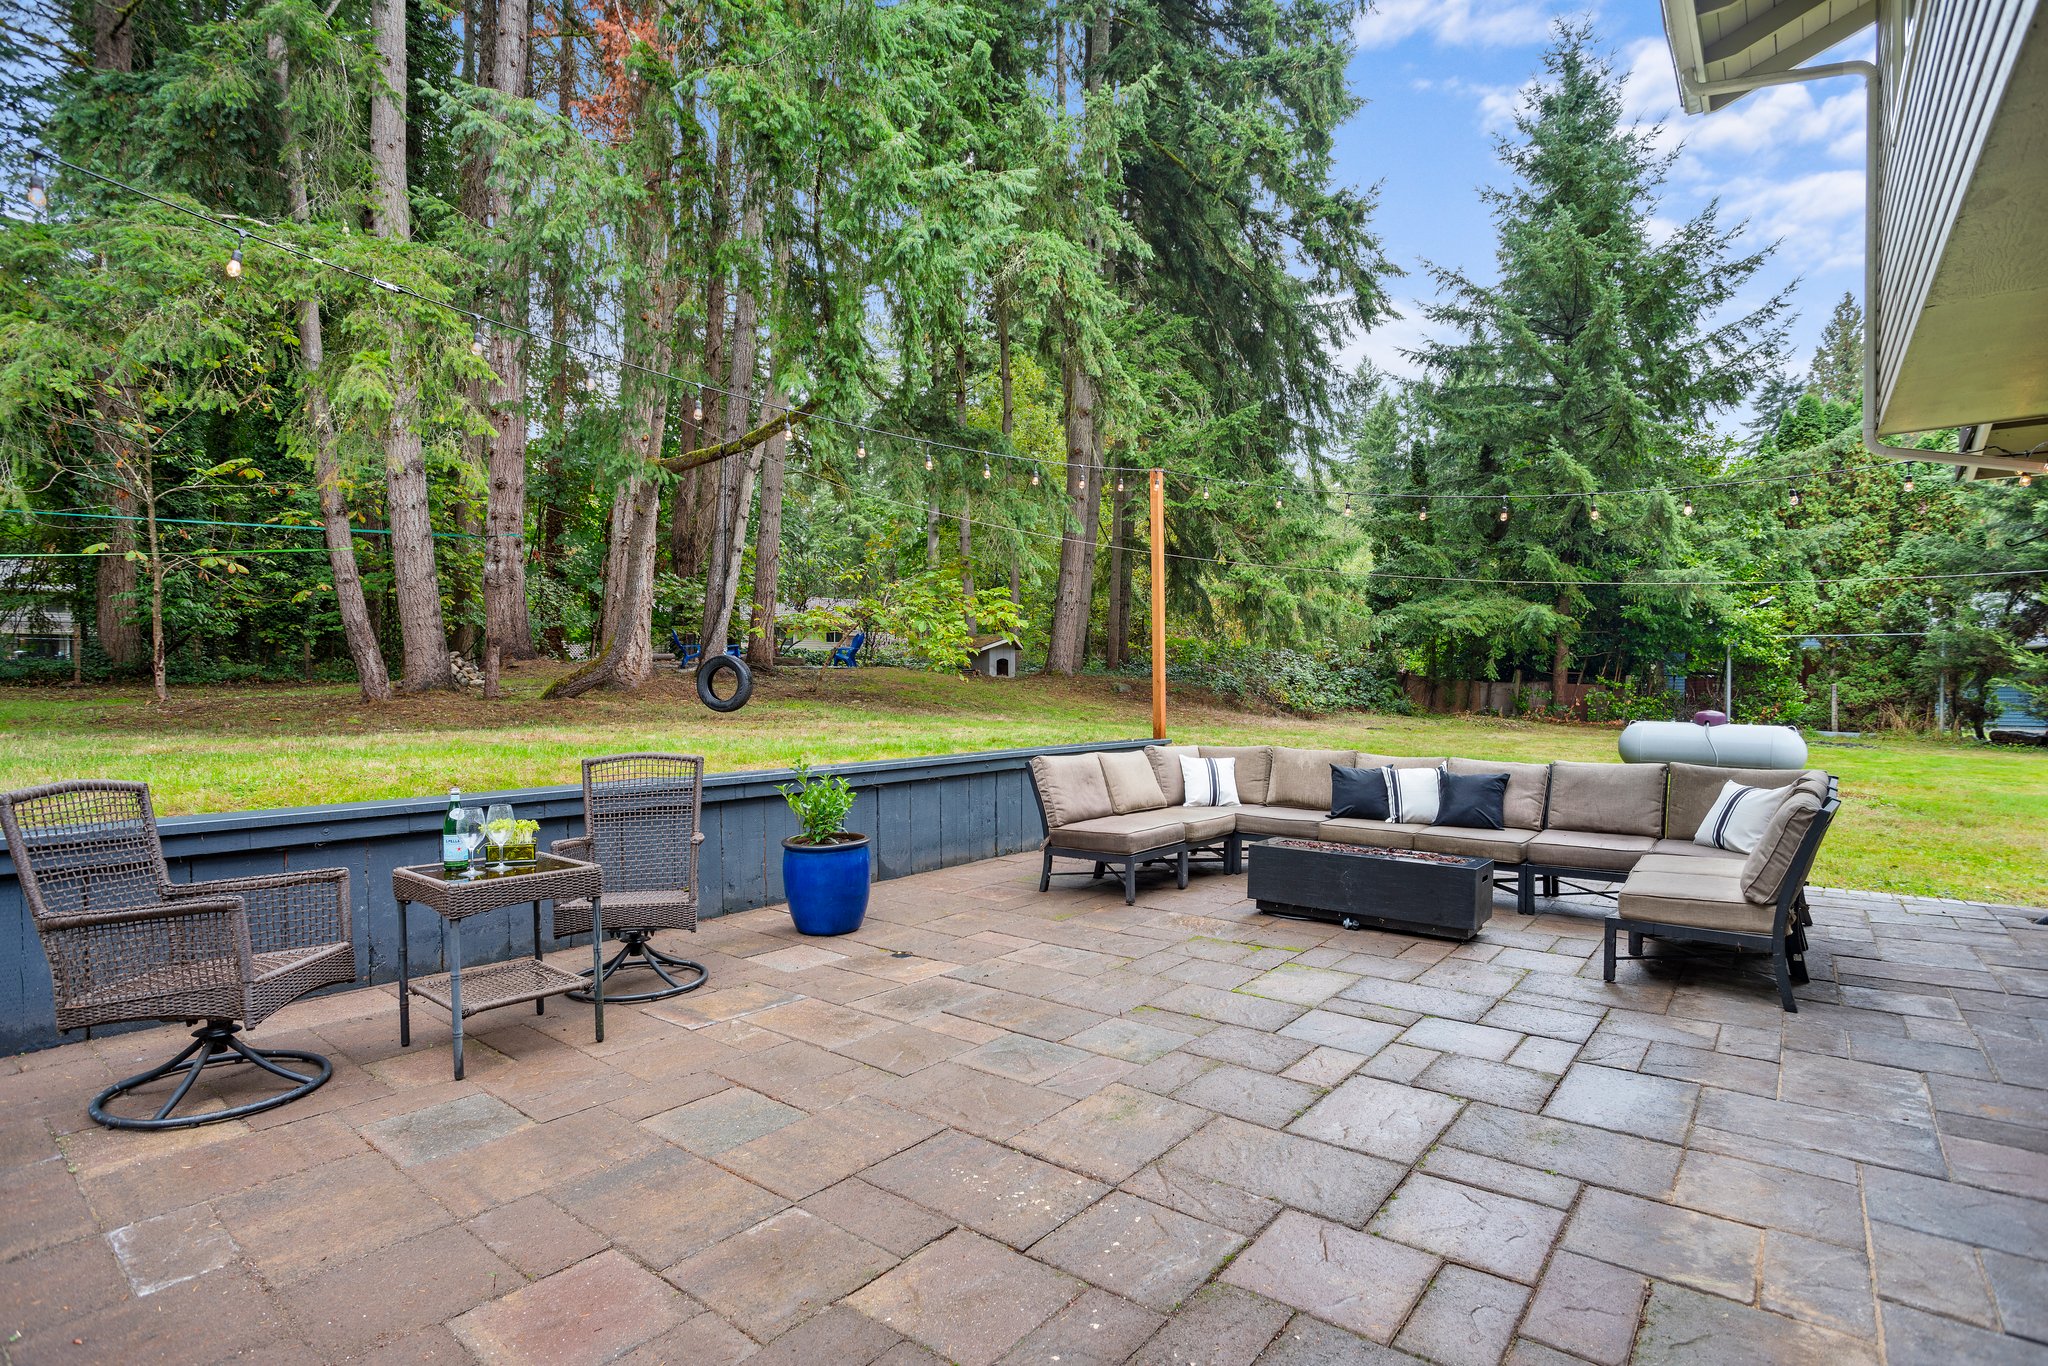 Extra large patio with over 1000 sq feet of space to work with!